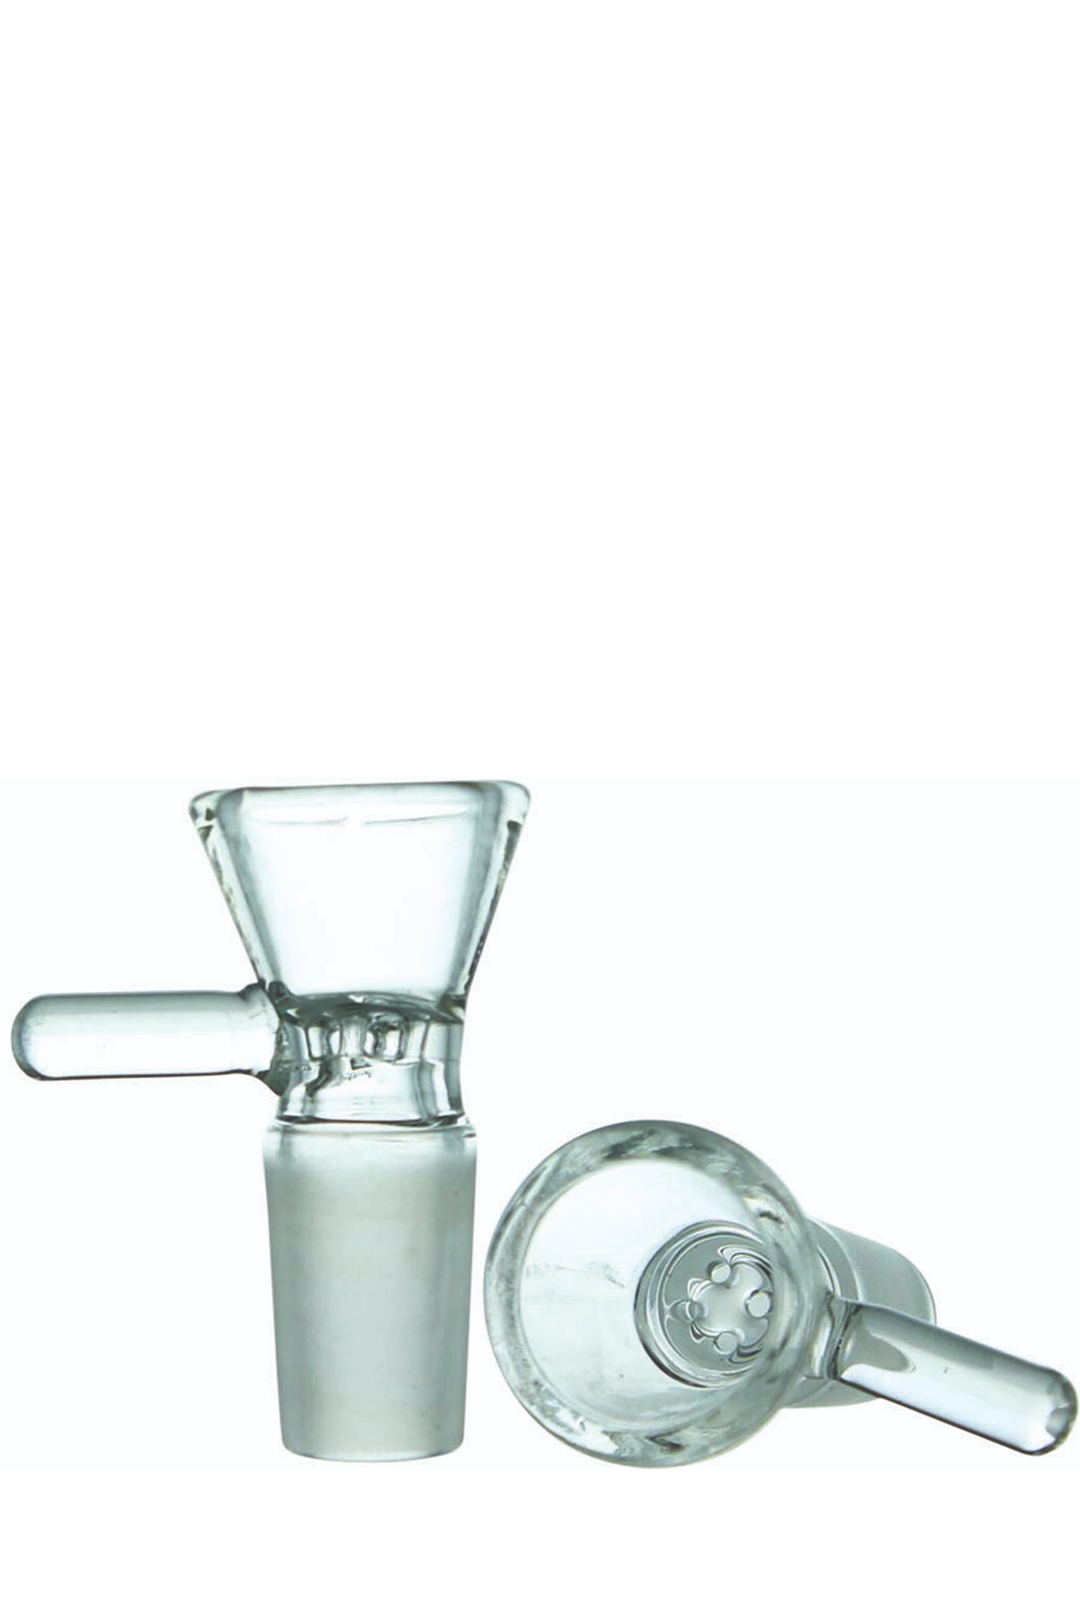 Wisher Glass Collection - The SWL Store 